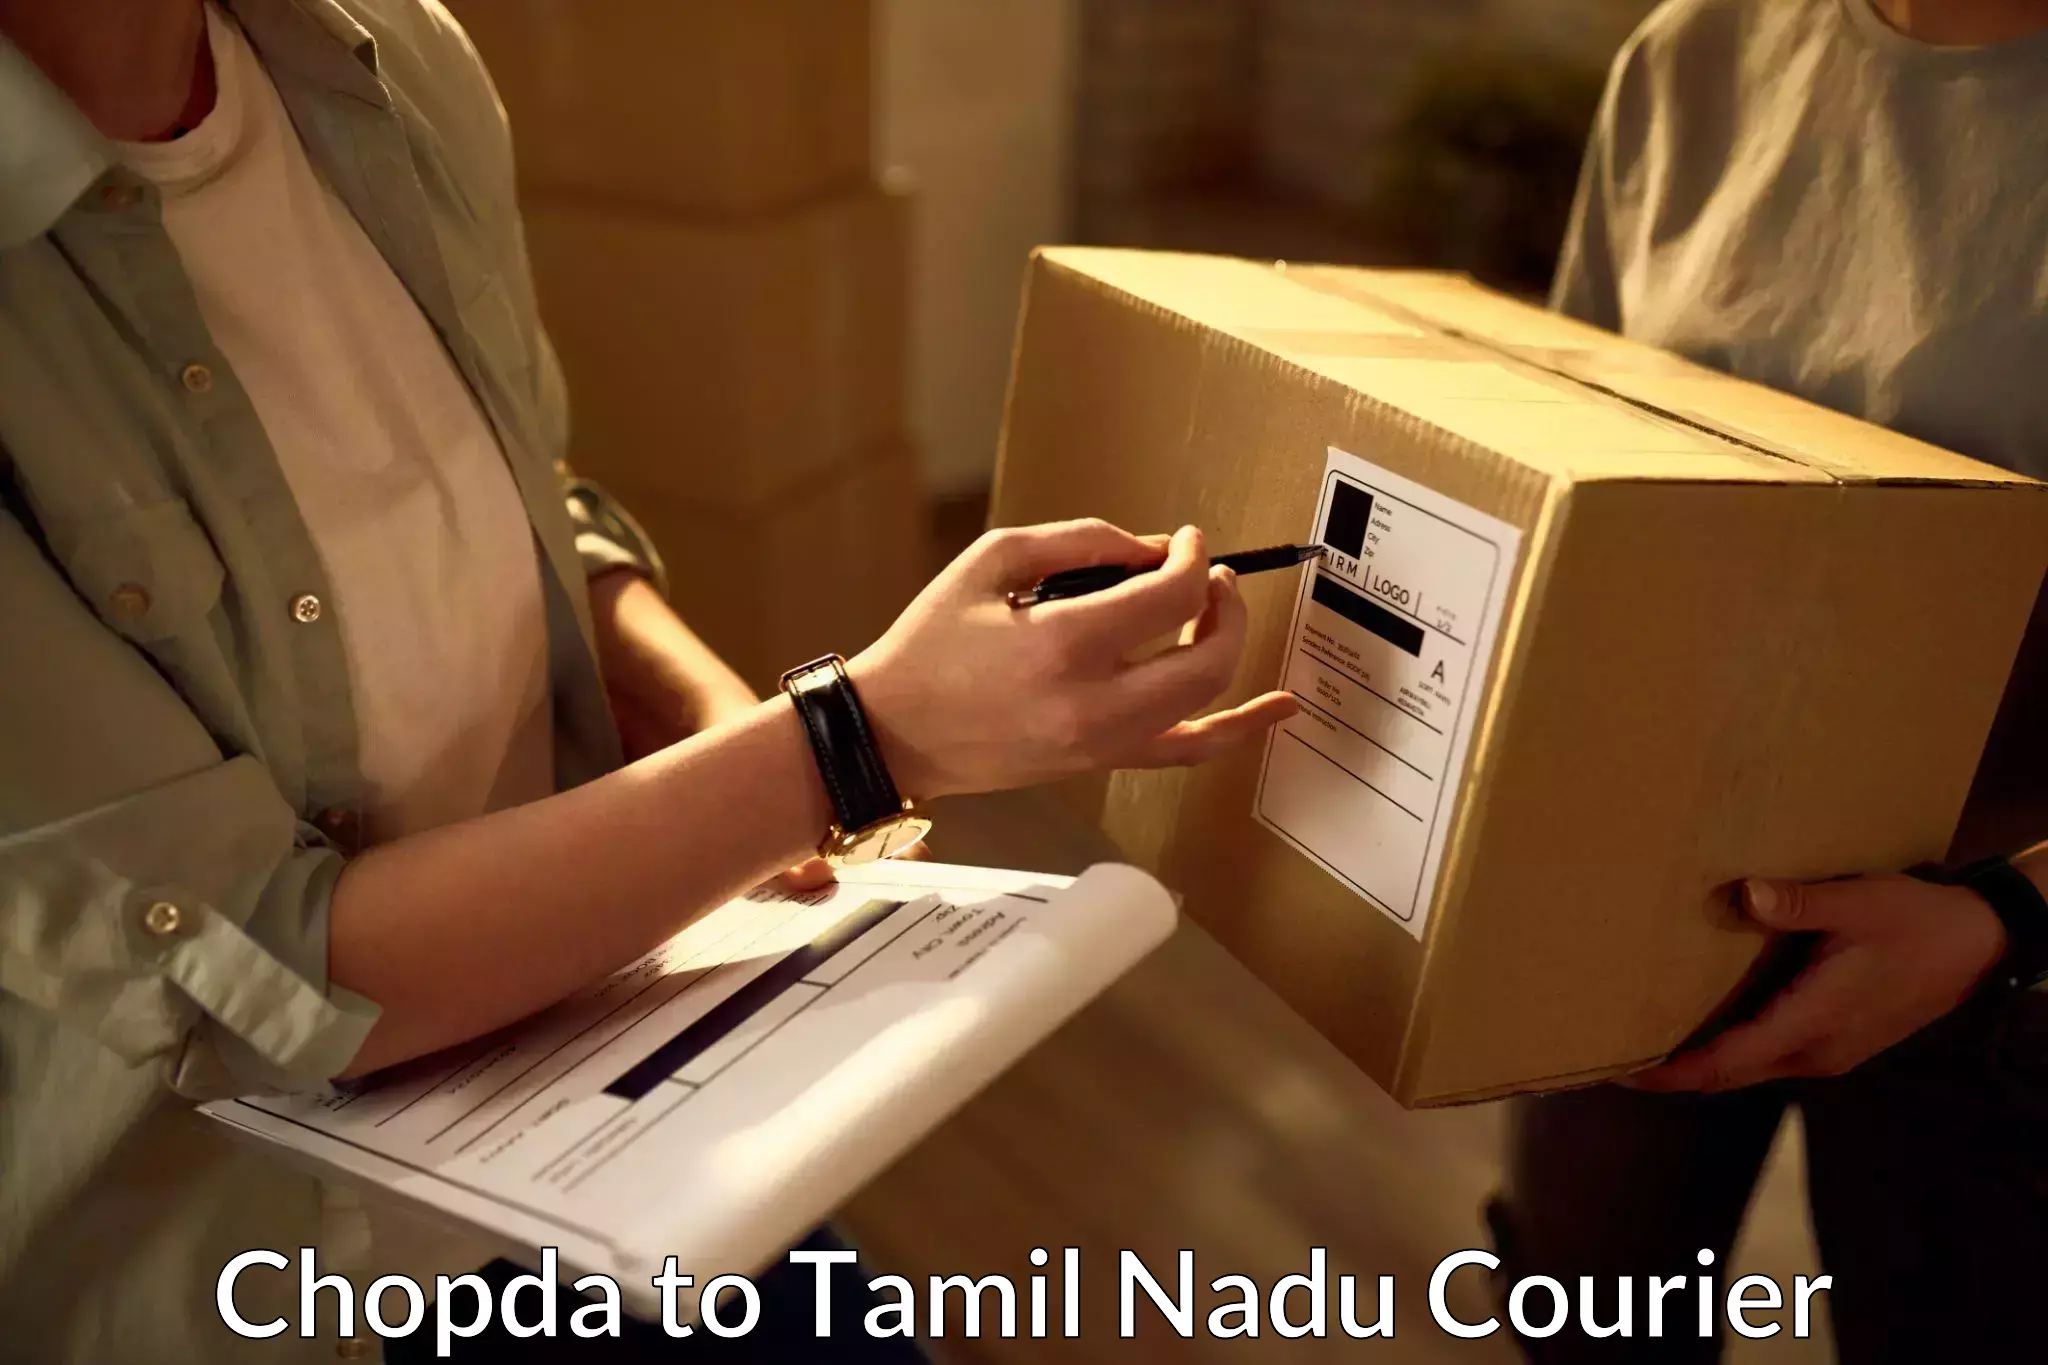 Flexible delivery scheduling Chopda to Ambur